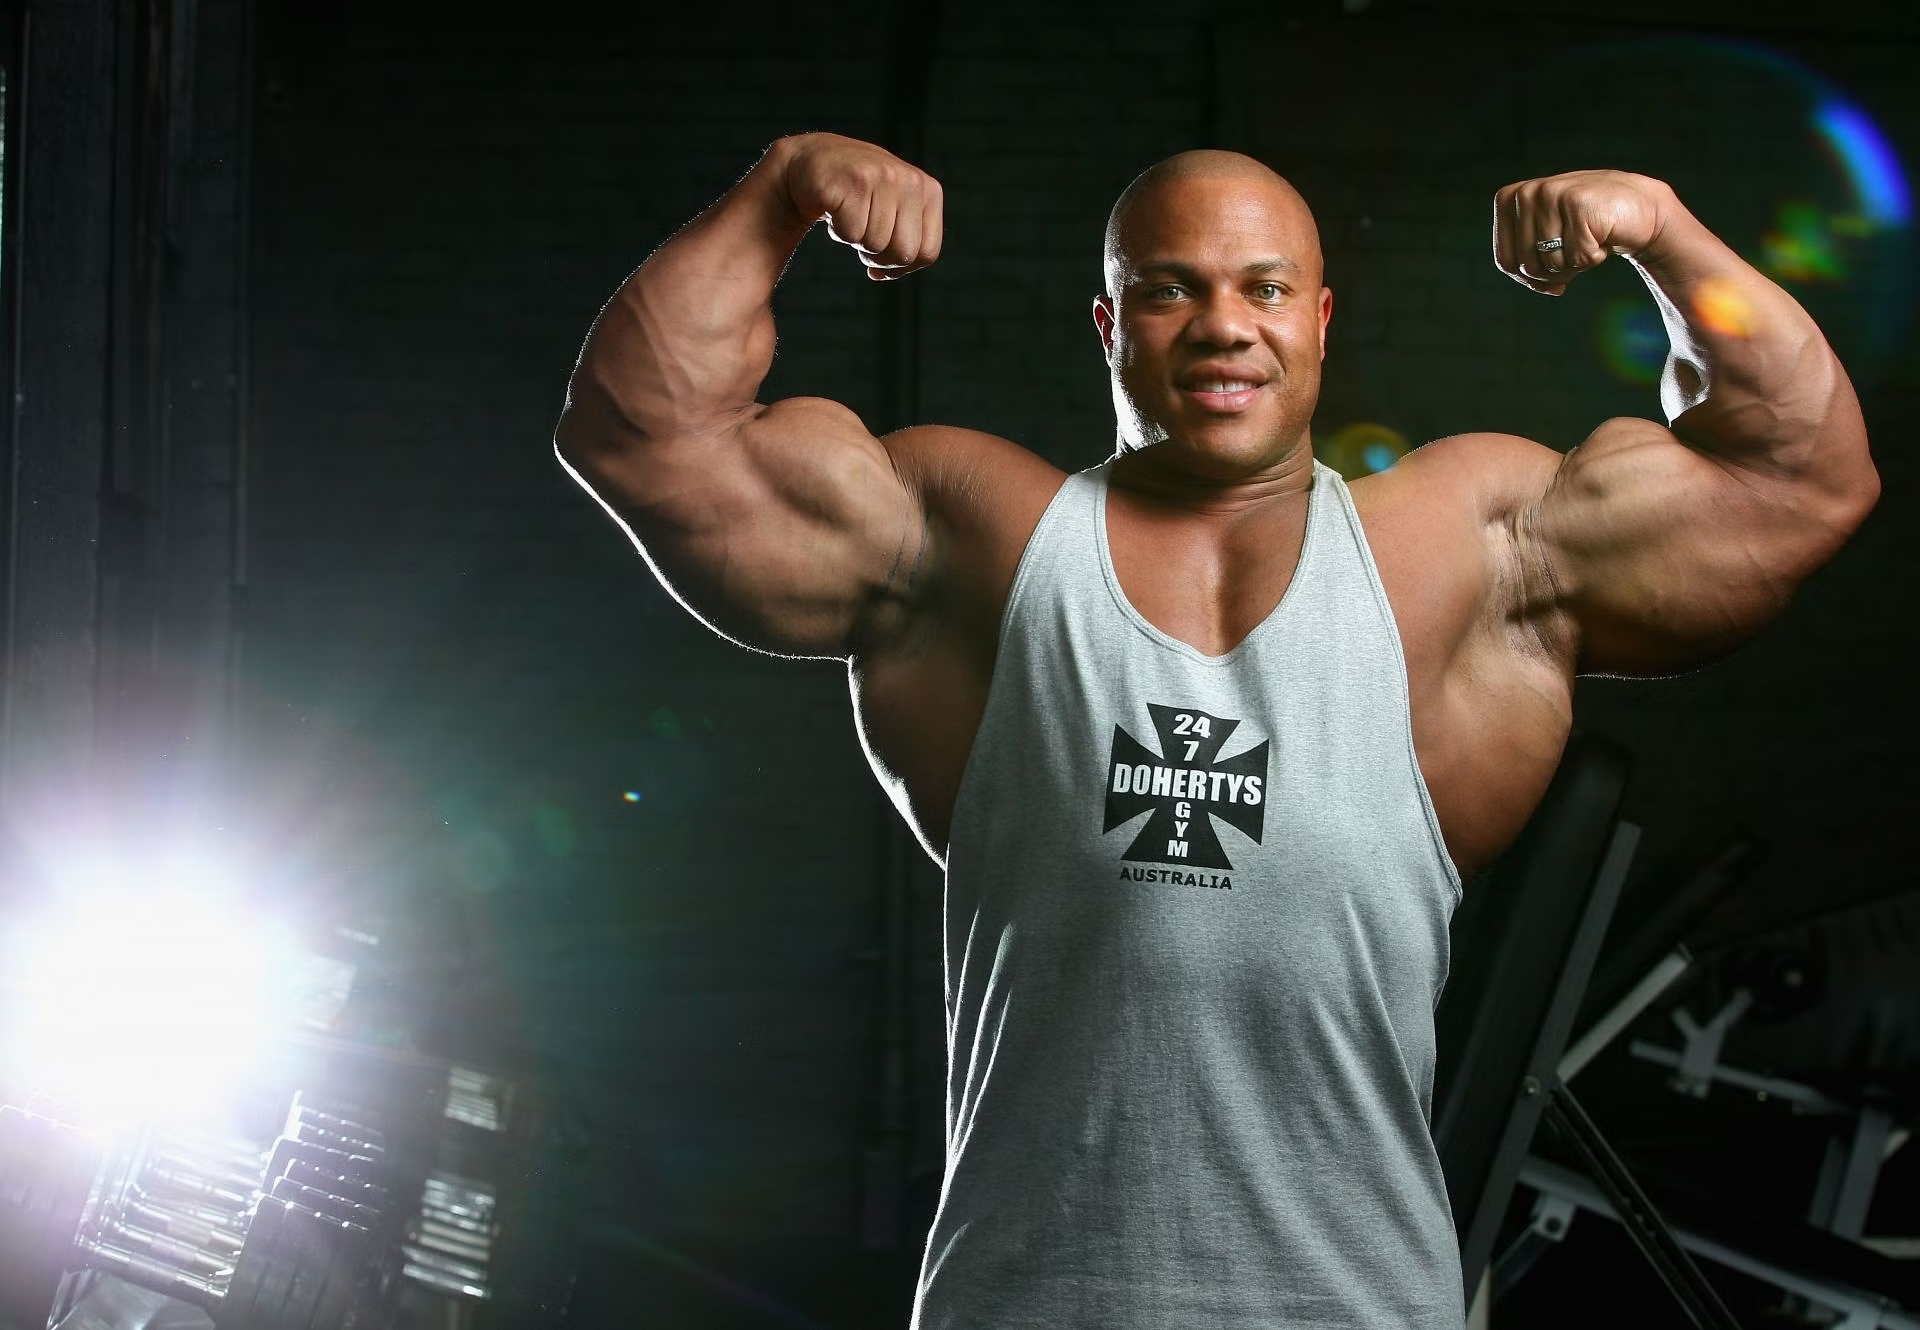 Phil Heath Net Worth - Unstoppable Pioneer's Revolutionary Feats And Unprecedented Firsts